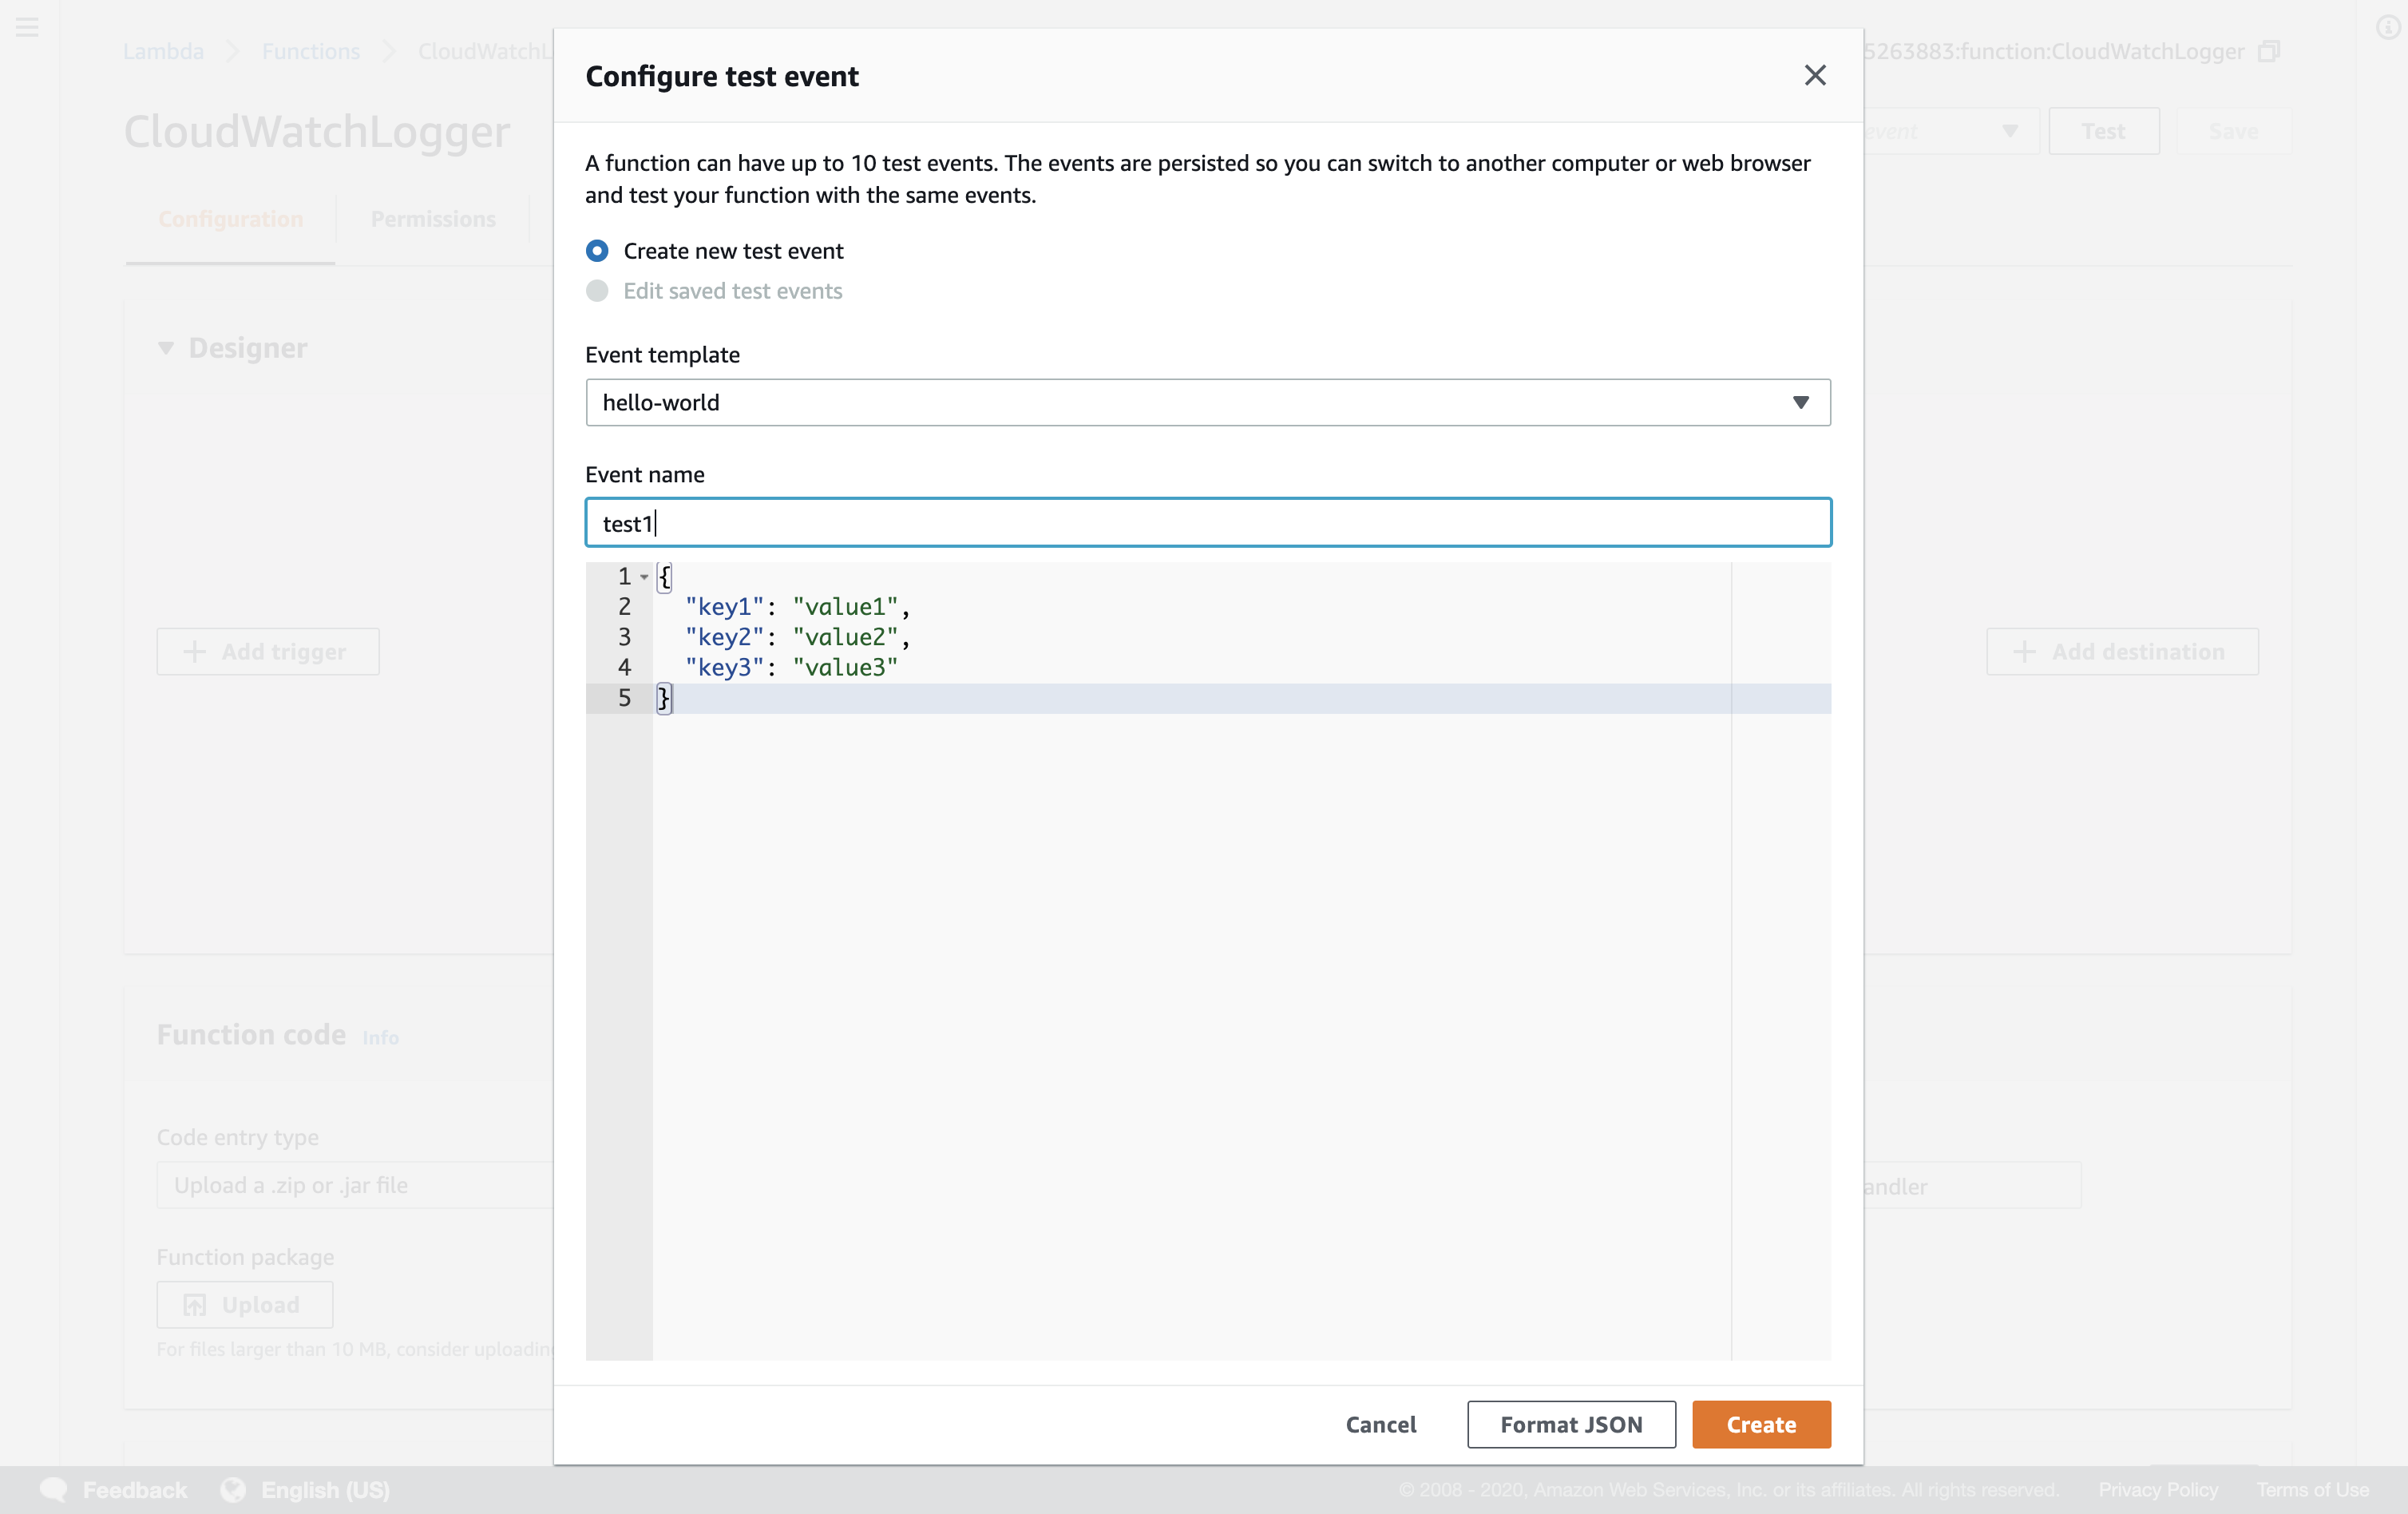 AWS Console showing a Lambda function test